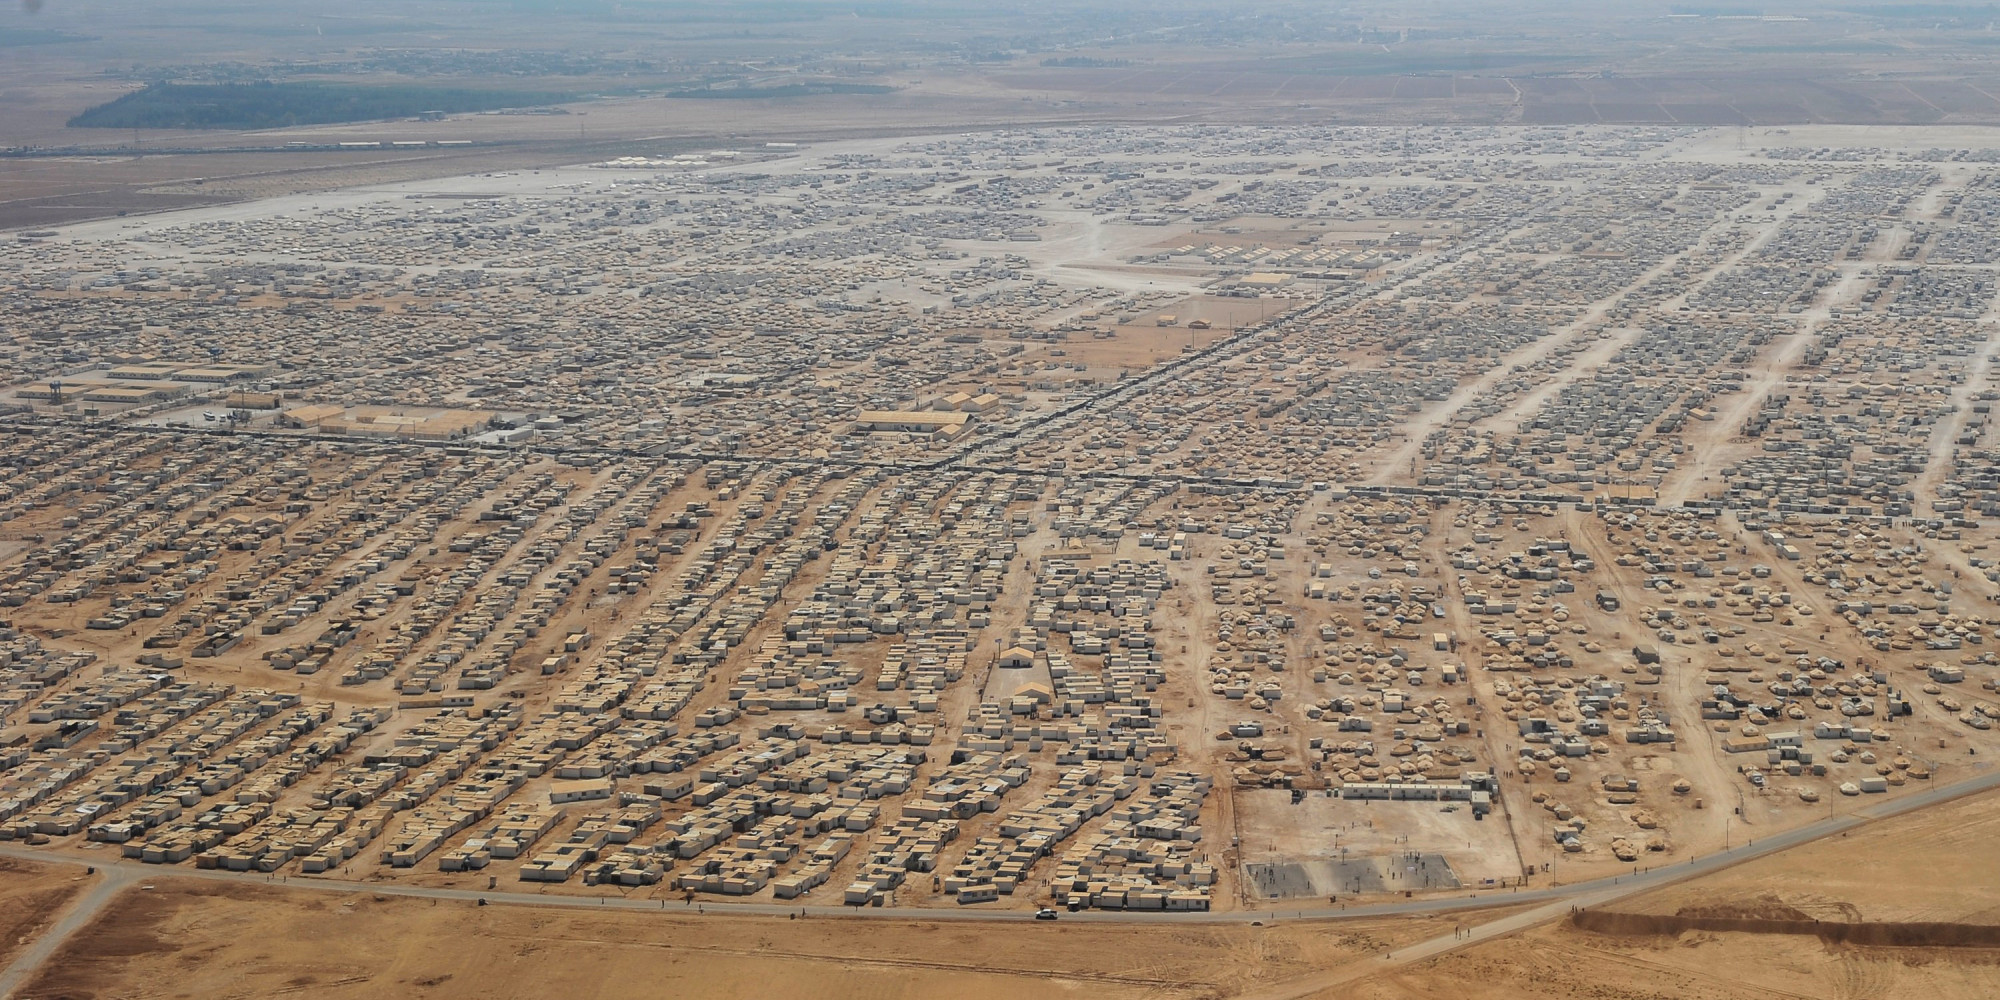 An aerial view shows the Zaatari refugee camp on July 18, 2013 near the Jordanian city of Mafraq, some 8 kilometers from the Jordanian-Syrian border. The northern Jordanian Zaatari refugee camp is home to 115,000 Syrians. AFP PHOTO/MANDEL NGAN/POOL